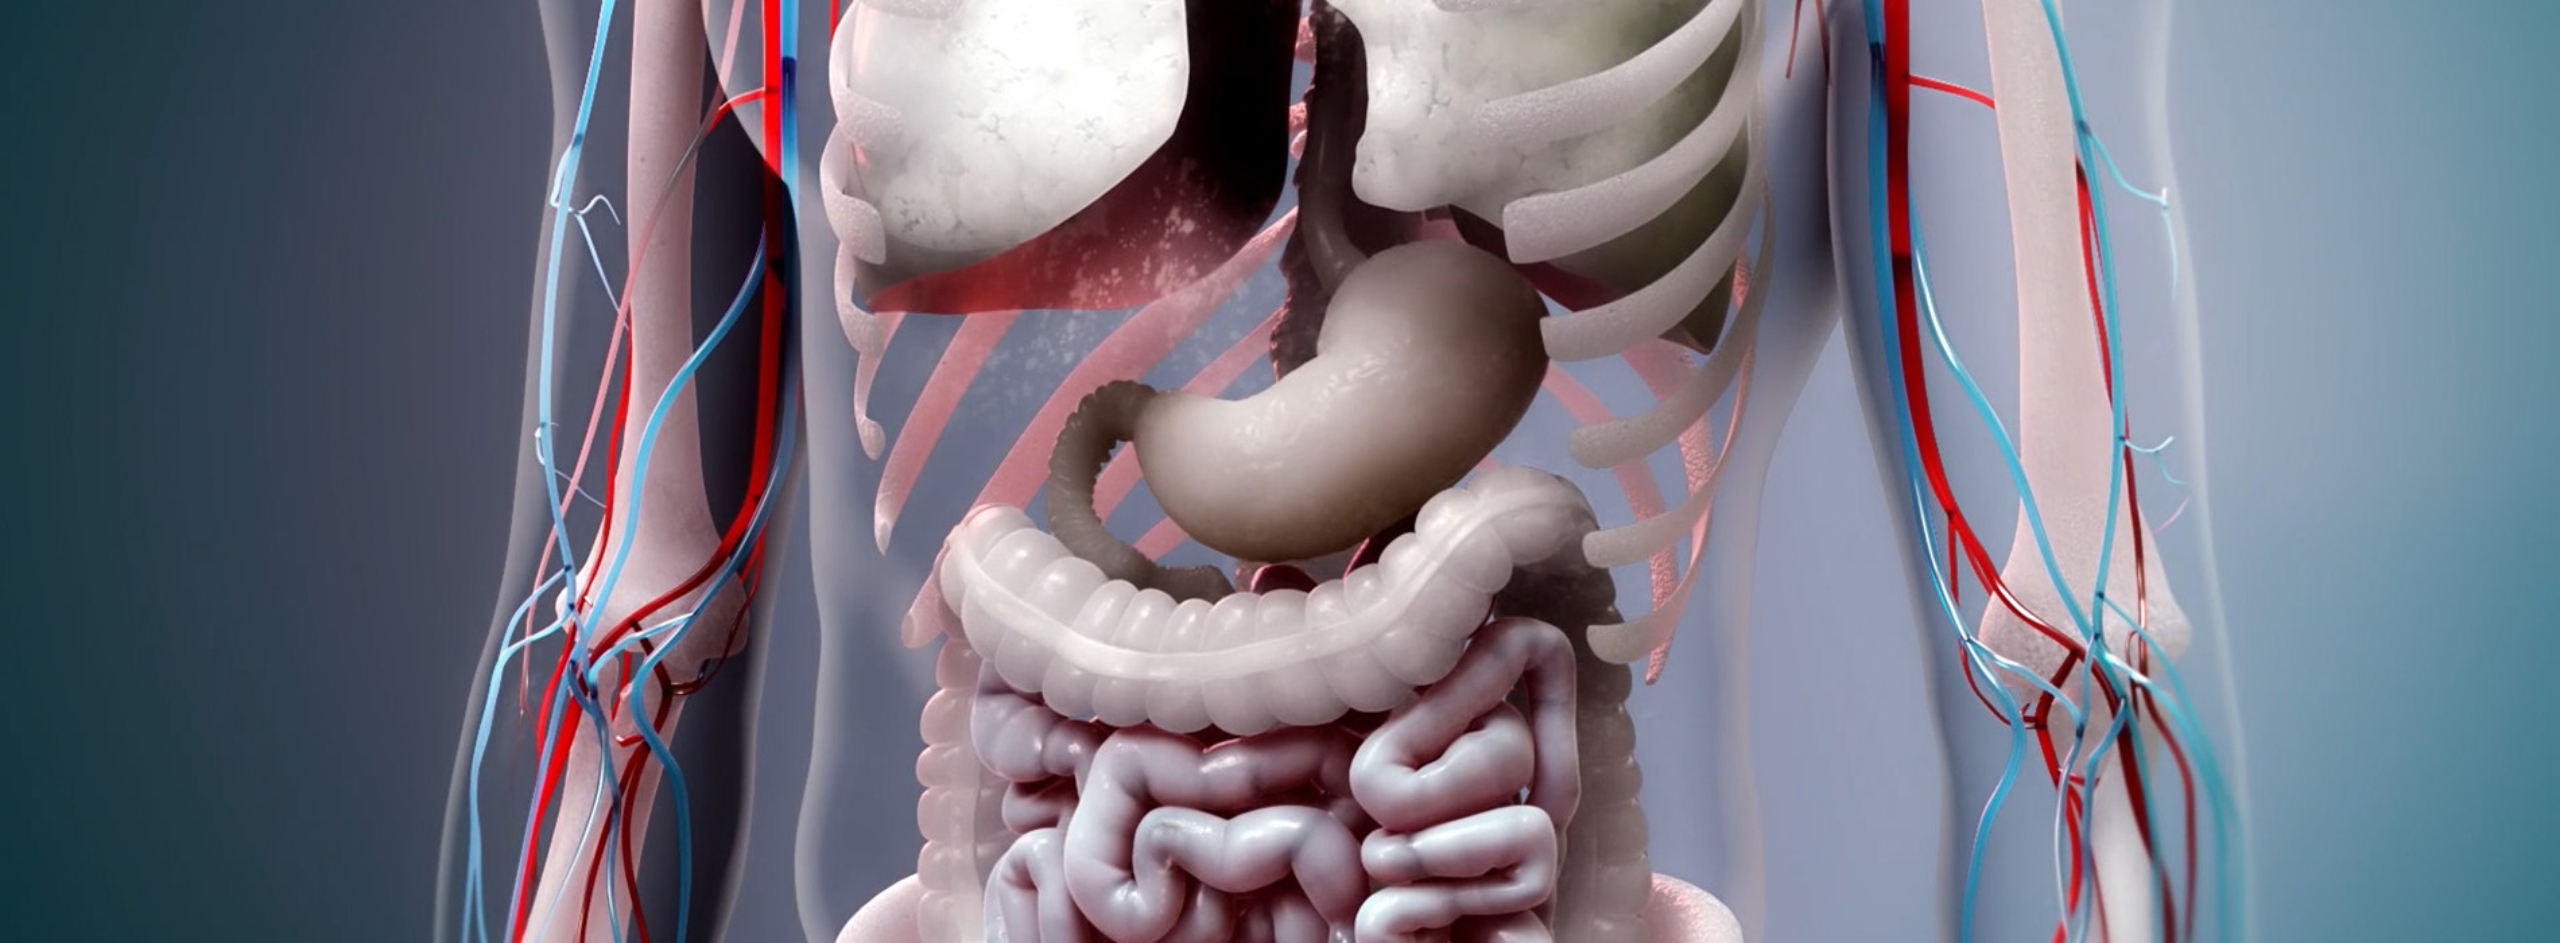 3D model of human stomach designed by Random42